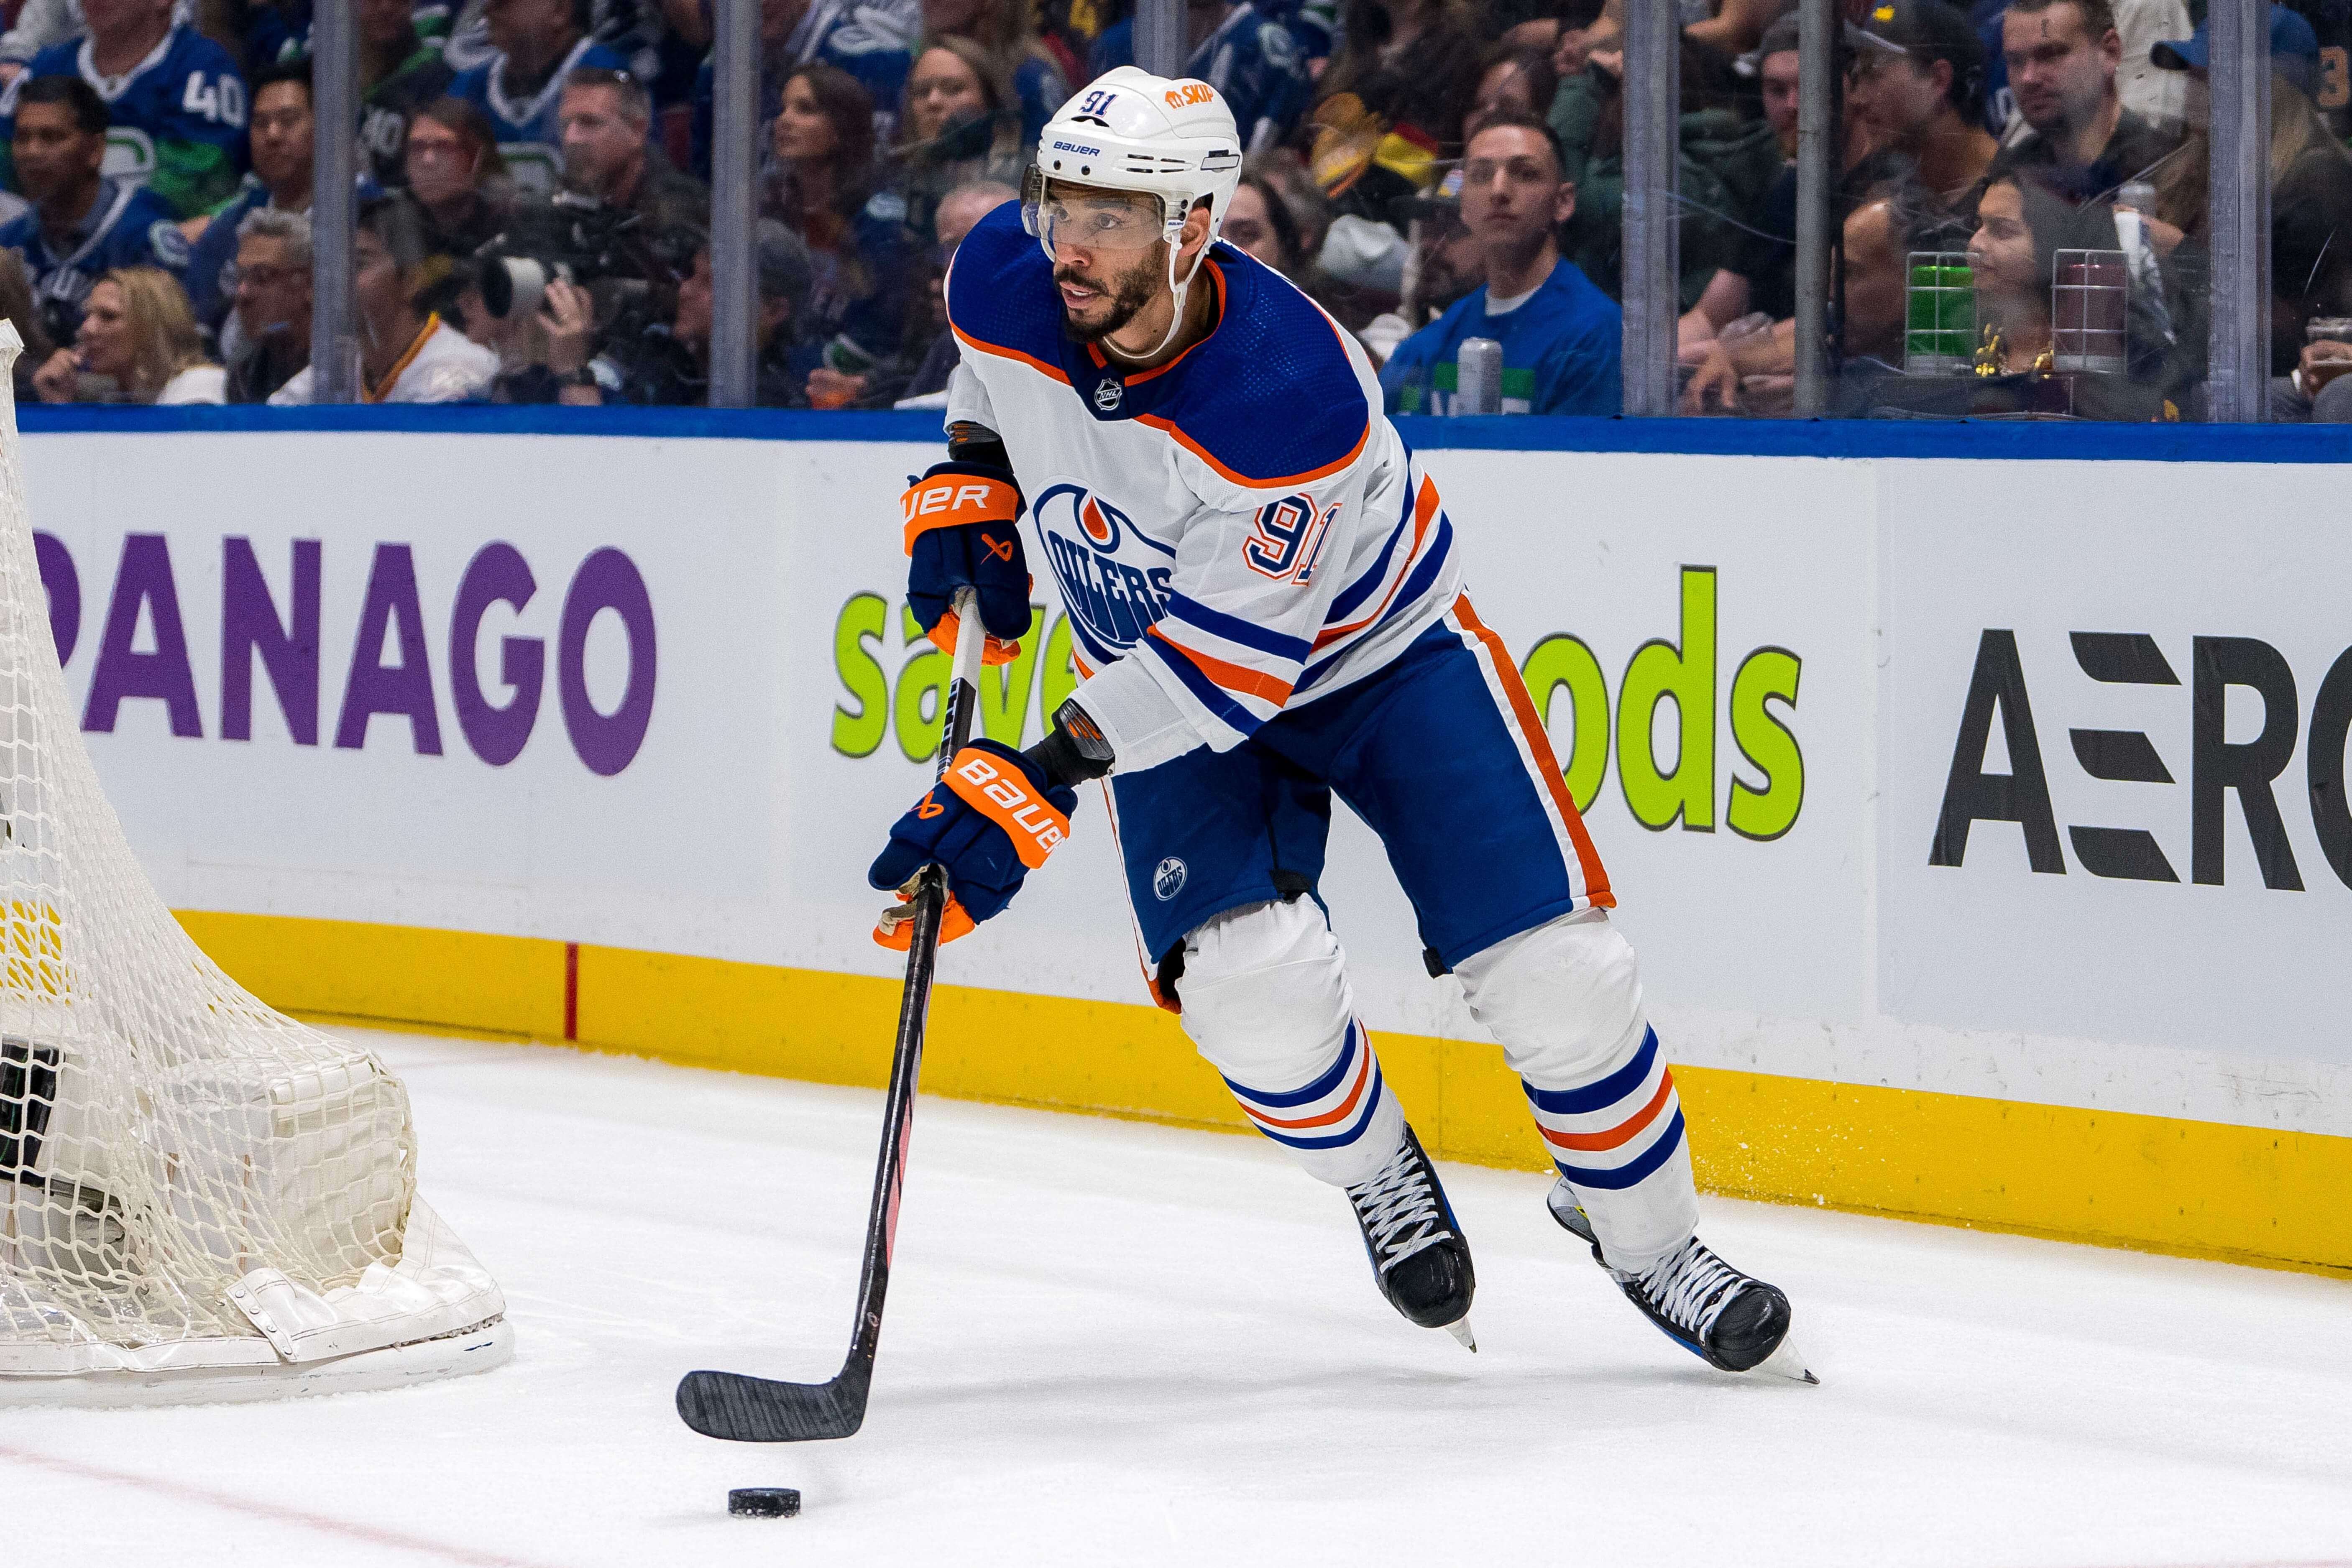 How To Bet - Oilers vs Stars Same-Game Parlay Picks for Friday's Game